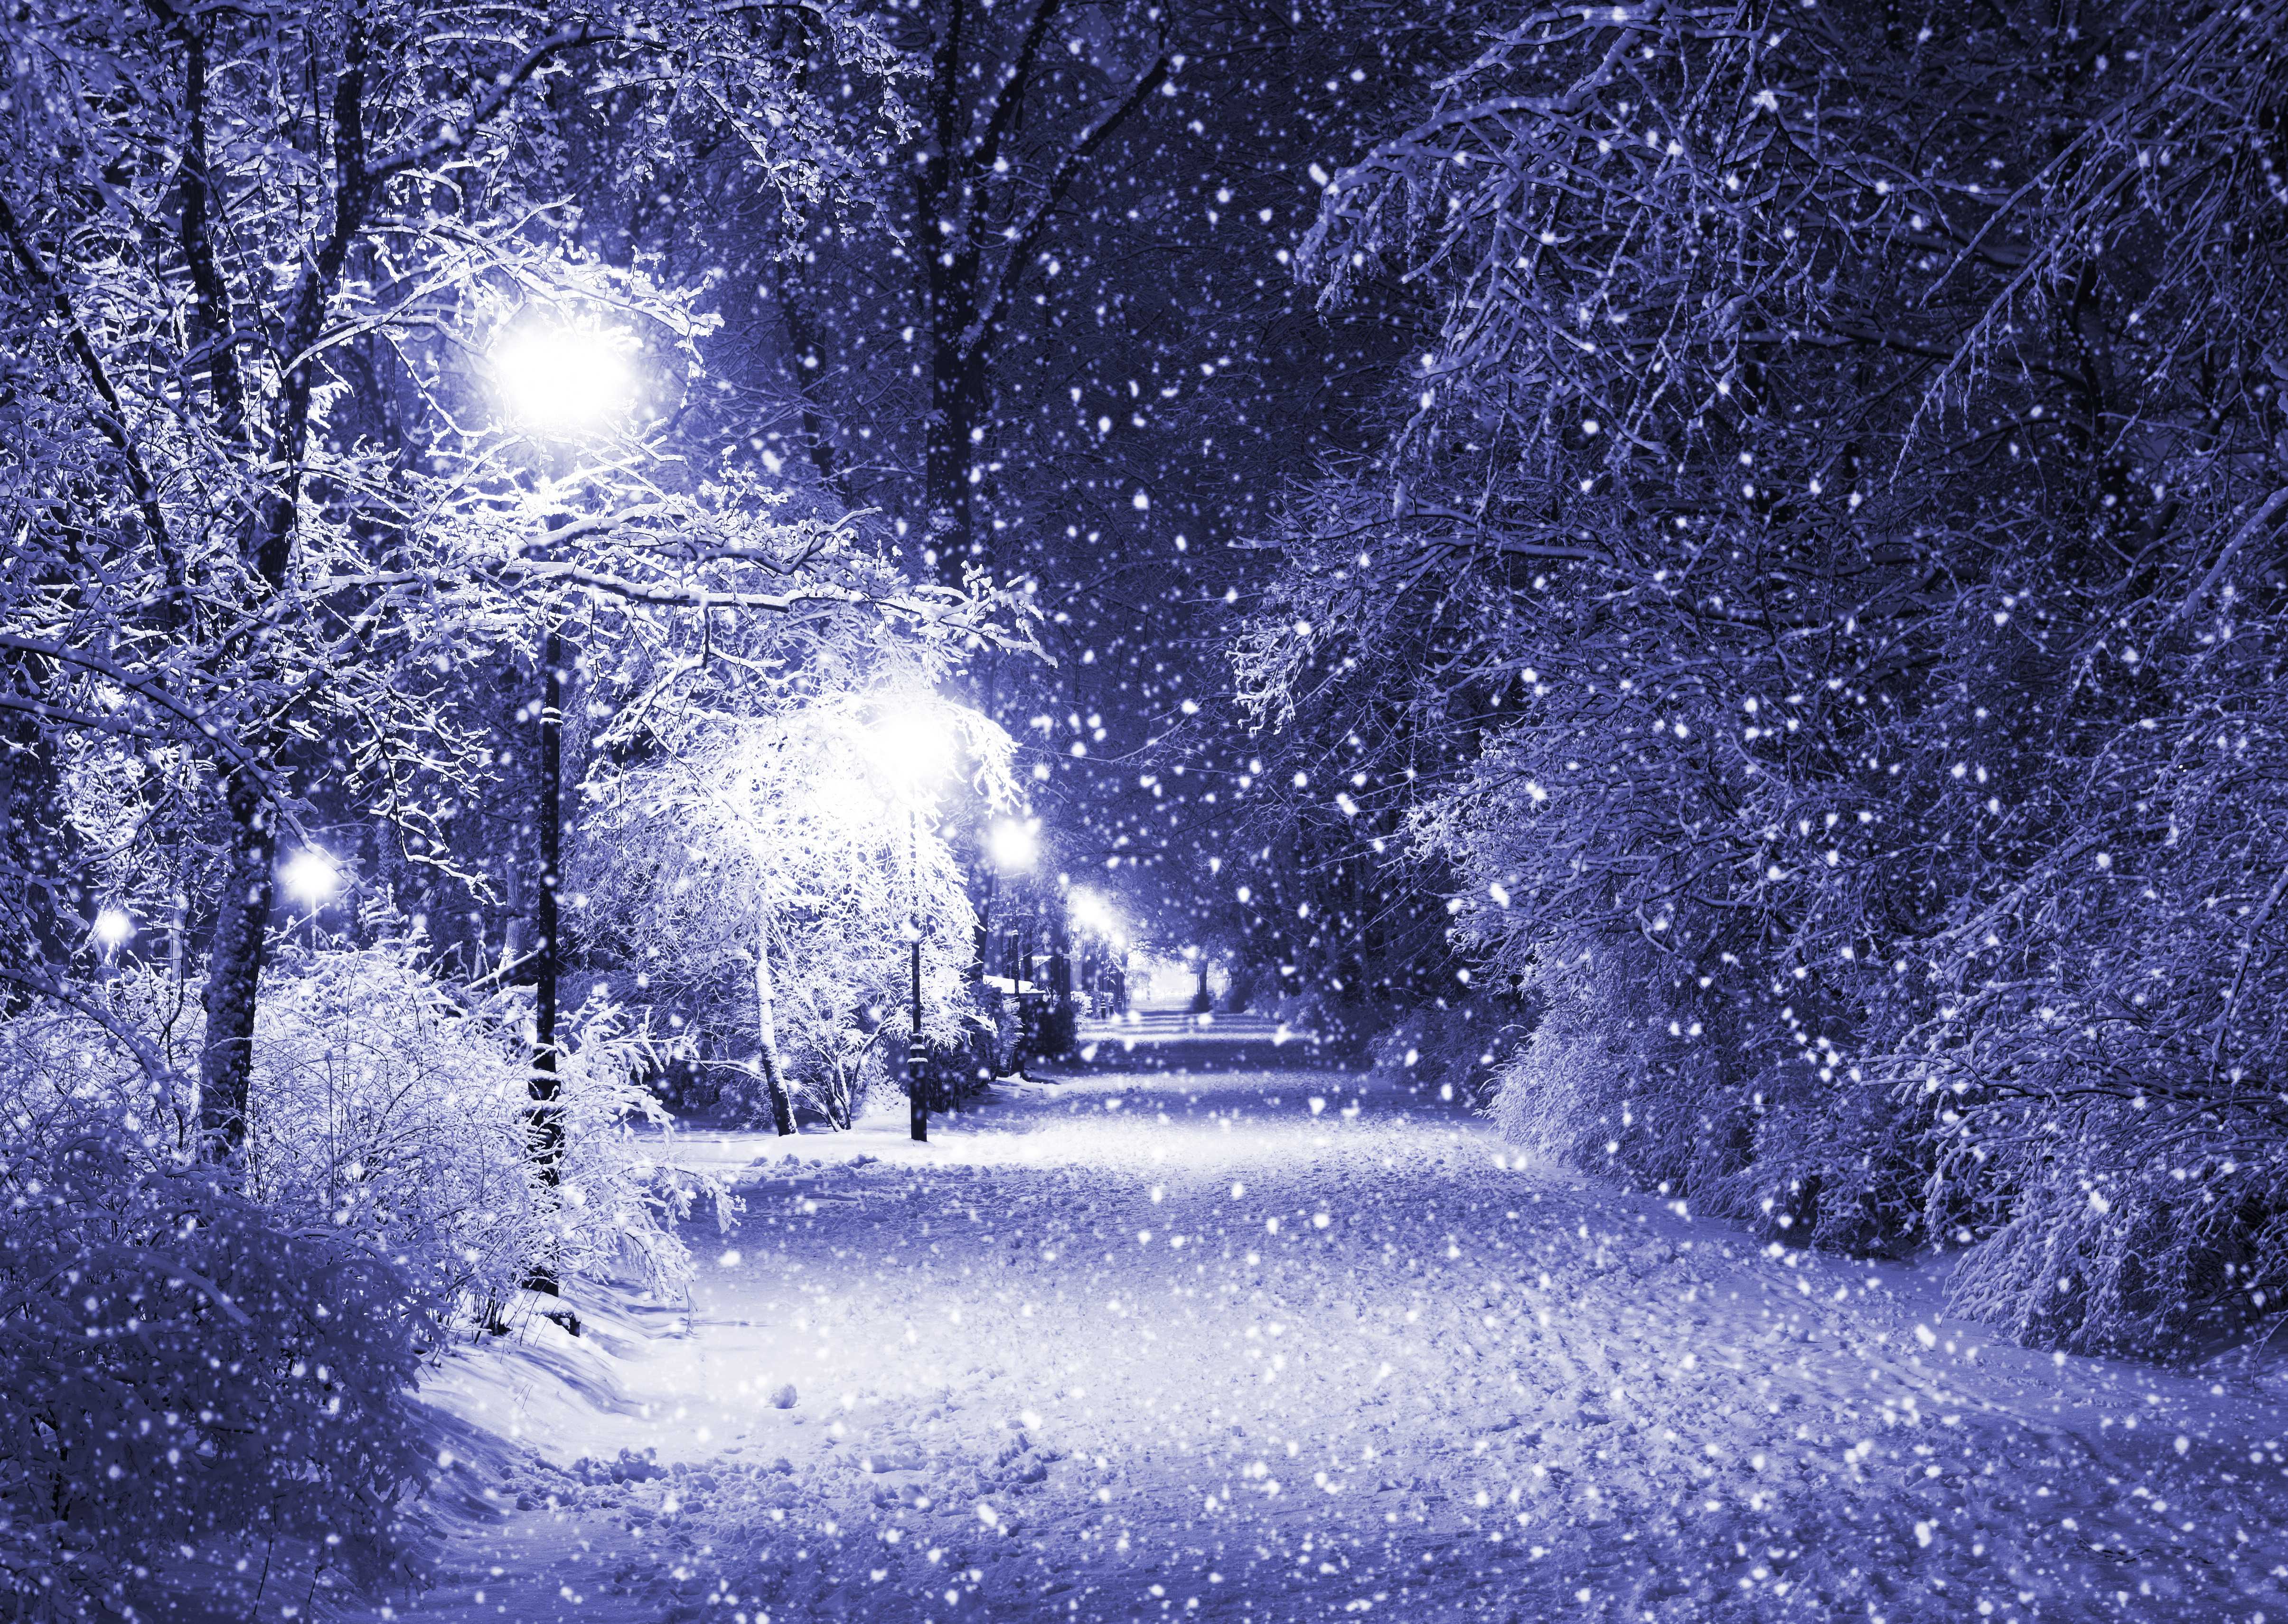 Snow Falling At Night Wallpaper | Hot Sex Picture